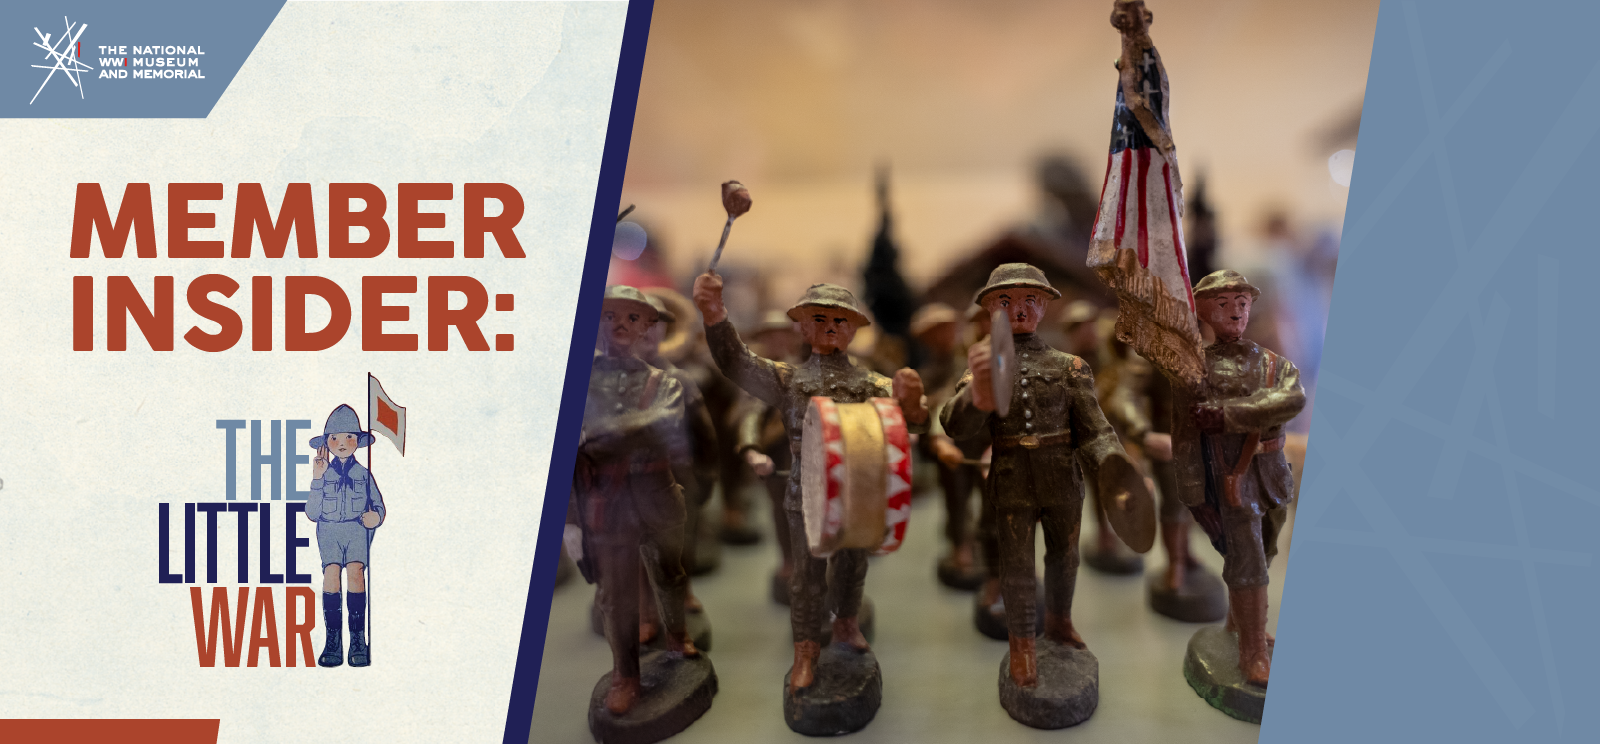 Image: Close-up modern photograph of toy soldiers marching toward the viewer. Text: 'Member Insider / The Little War'